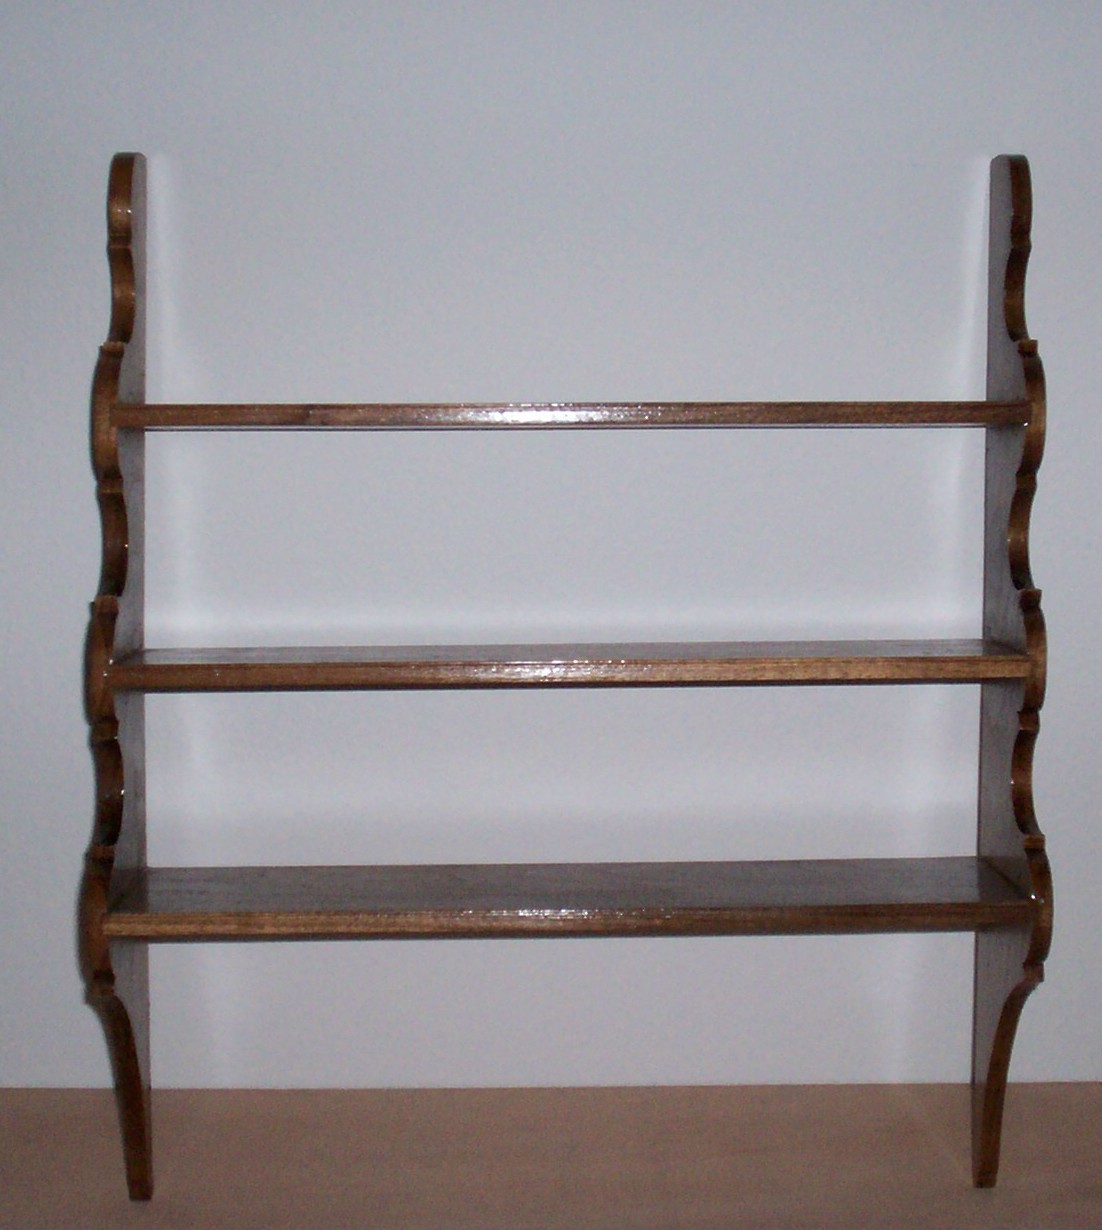 This shelf is easily mounted to the wall. Is perfect for showing off 